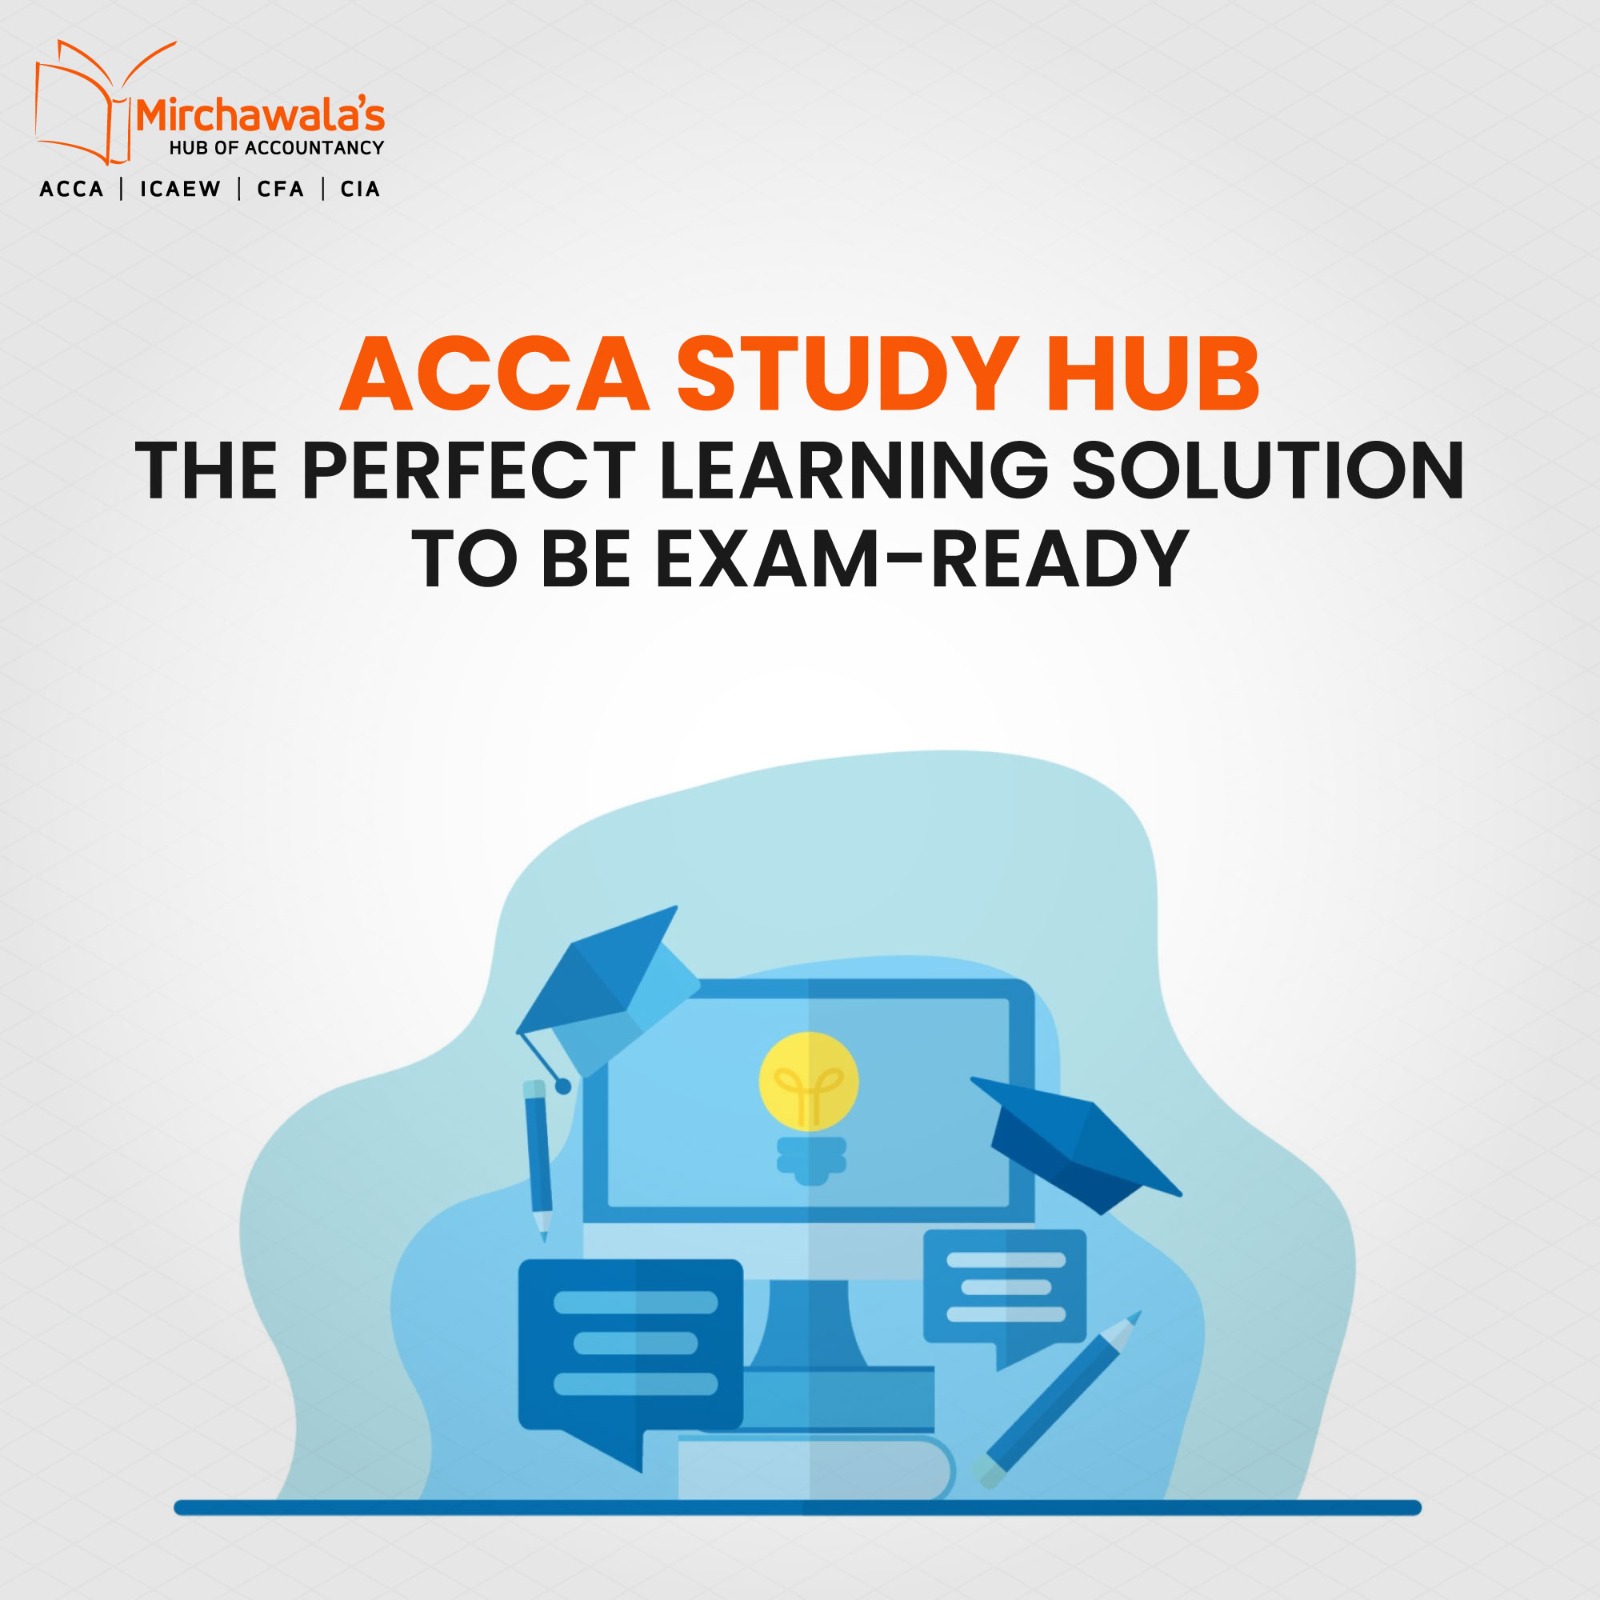 ACCA Study Hub: The Perfect Learning Solution to Be Exam-Ready